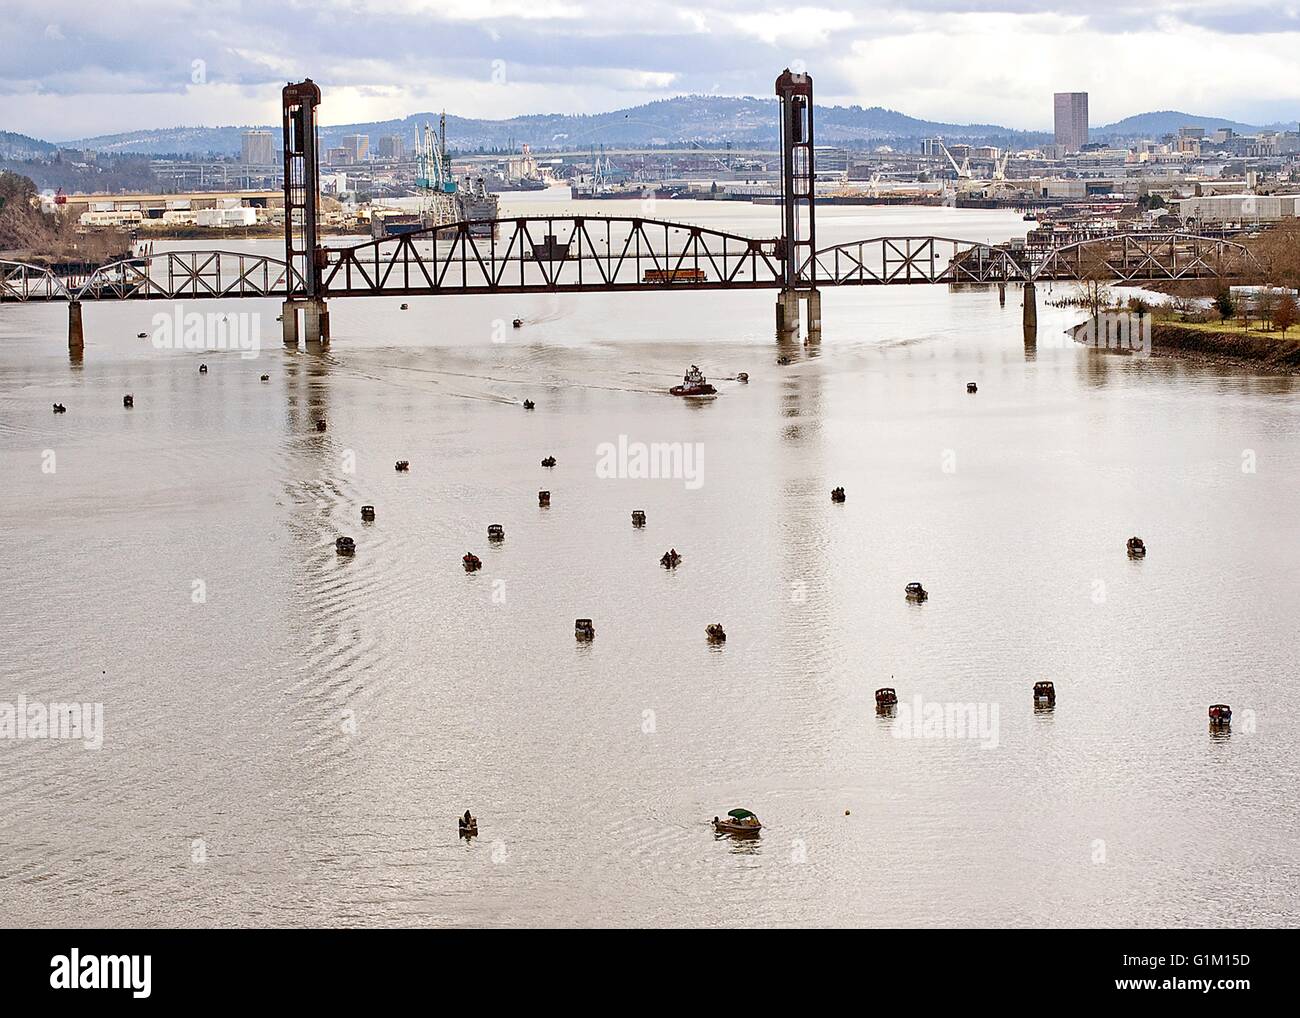 Dozens of fishing boats spread out along the Willamette River at the opening of sturgeon season in Portland, Oregon. Stock Photo